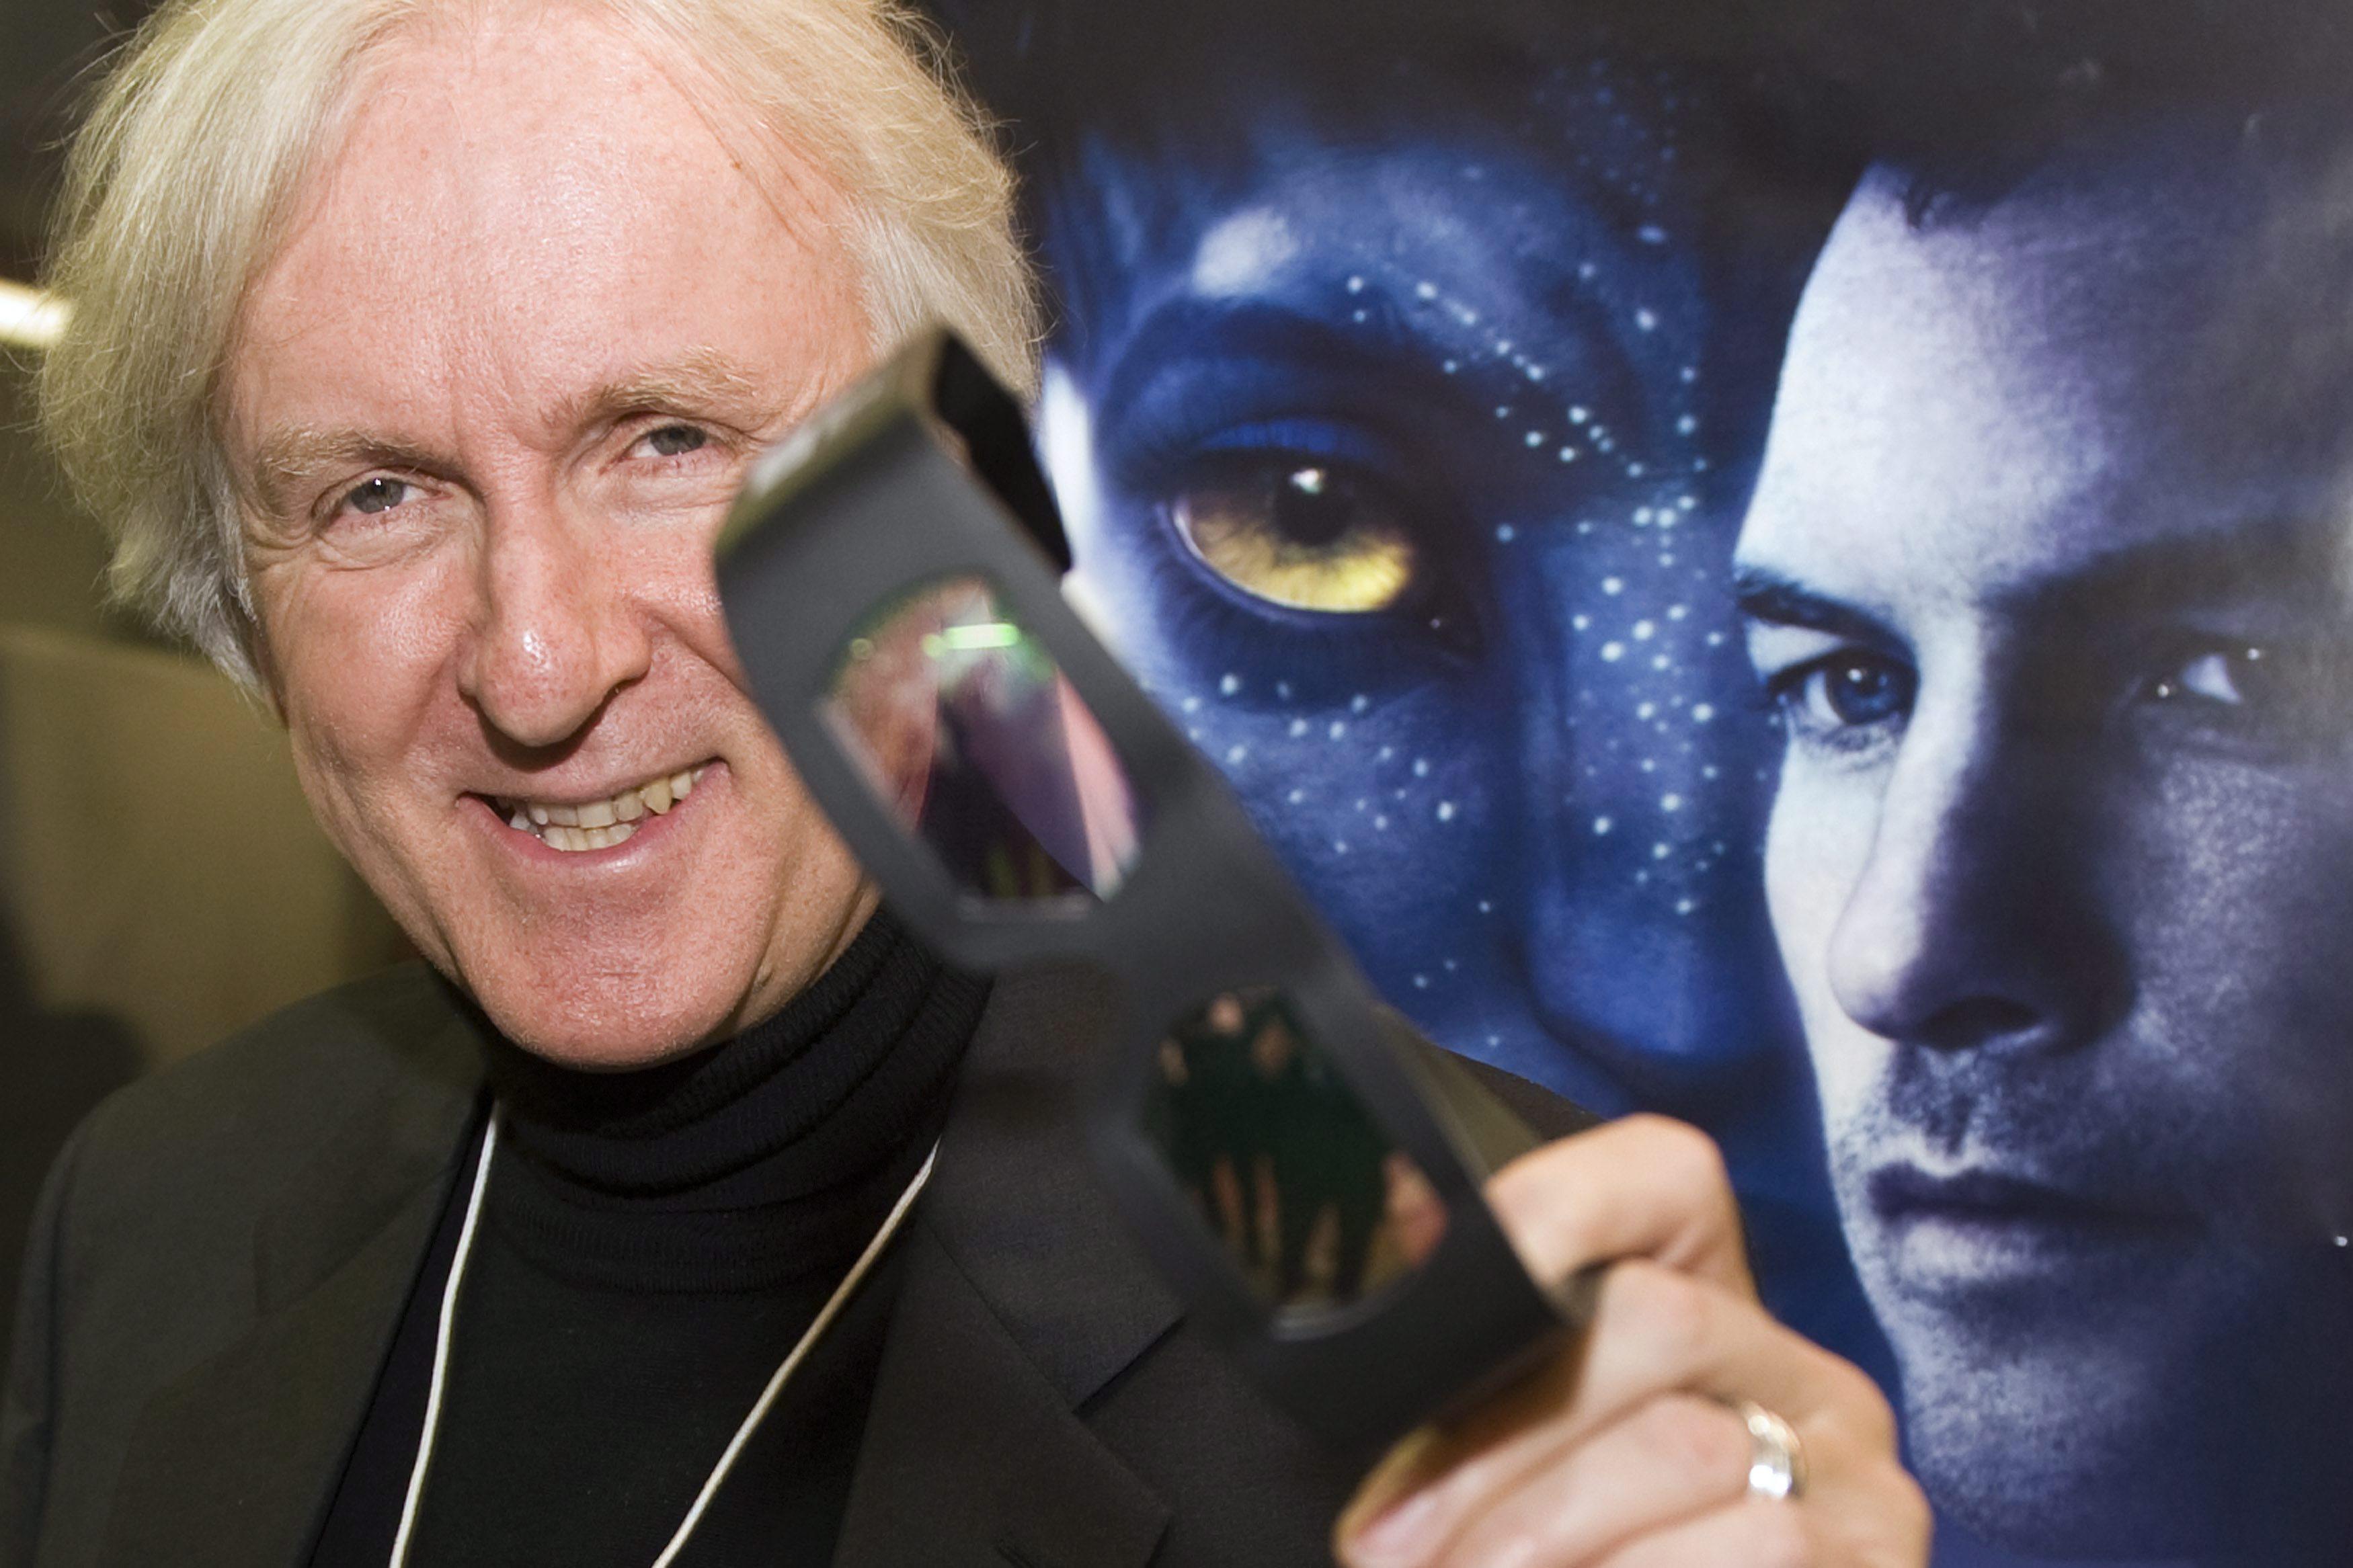 One of the most successful filmmakers of all time, James Cameron is also known for his ocean conservation efforts. Photo: EPA